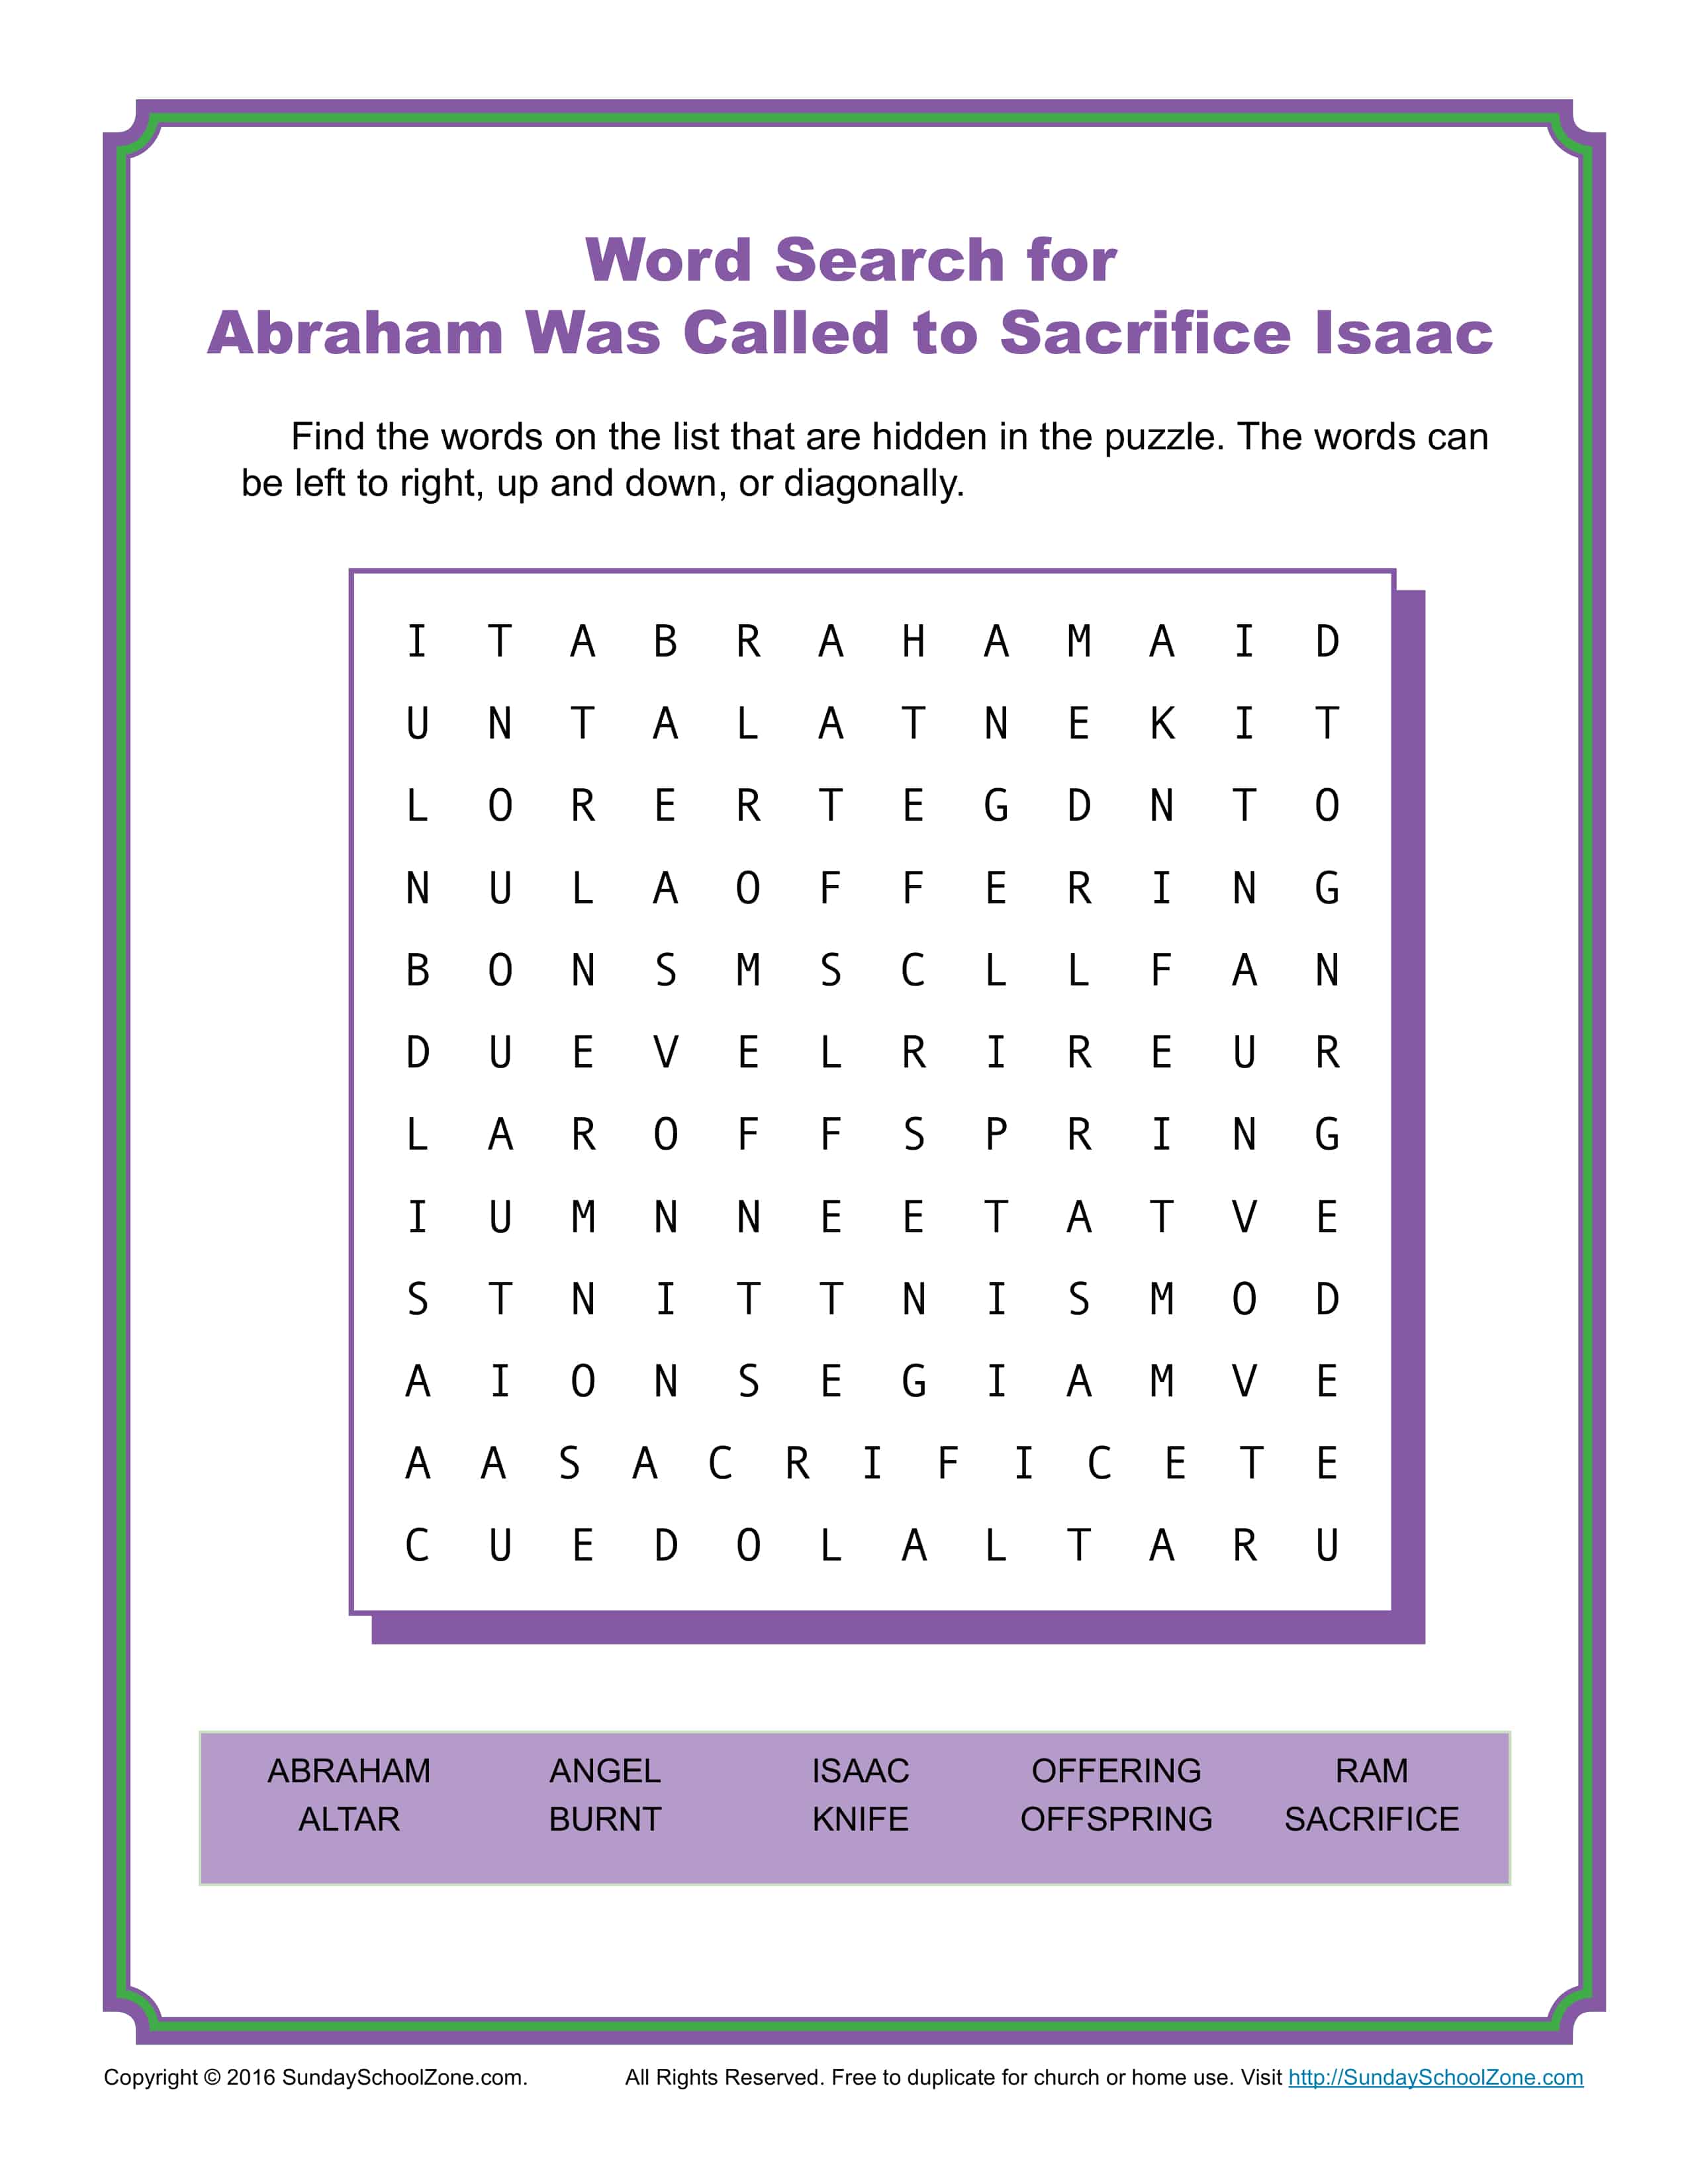 Abraham Was Called to Sacrifice Isaac Word Search - Children's Bible